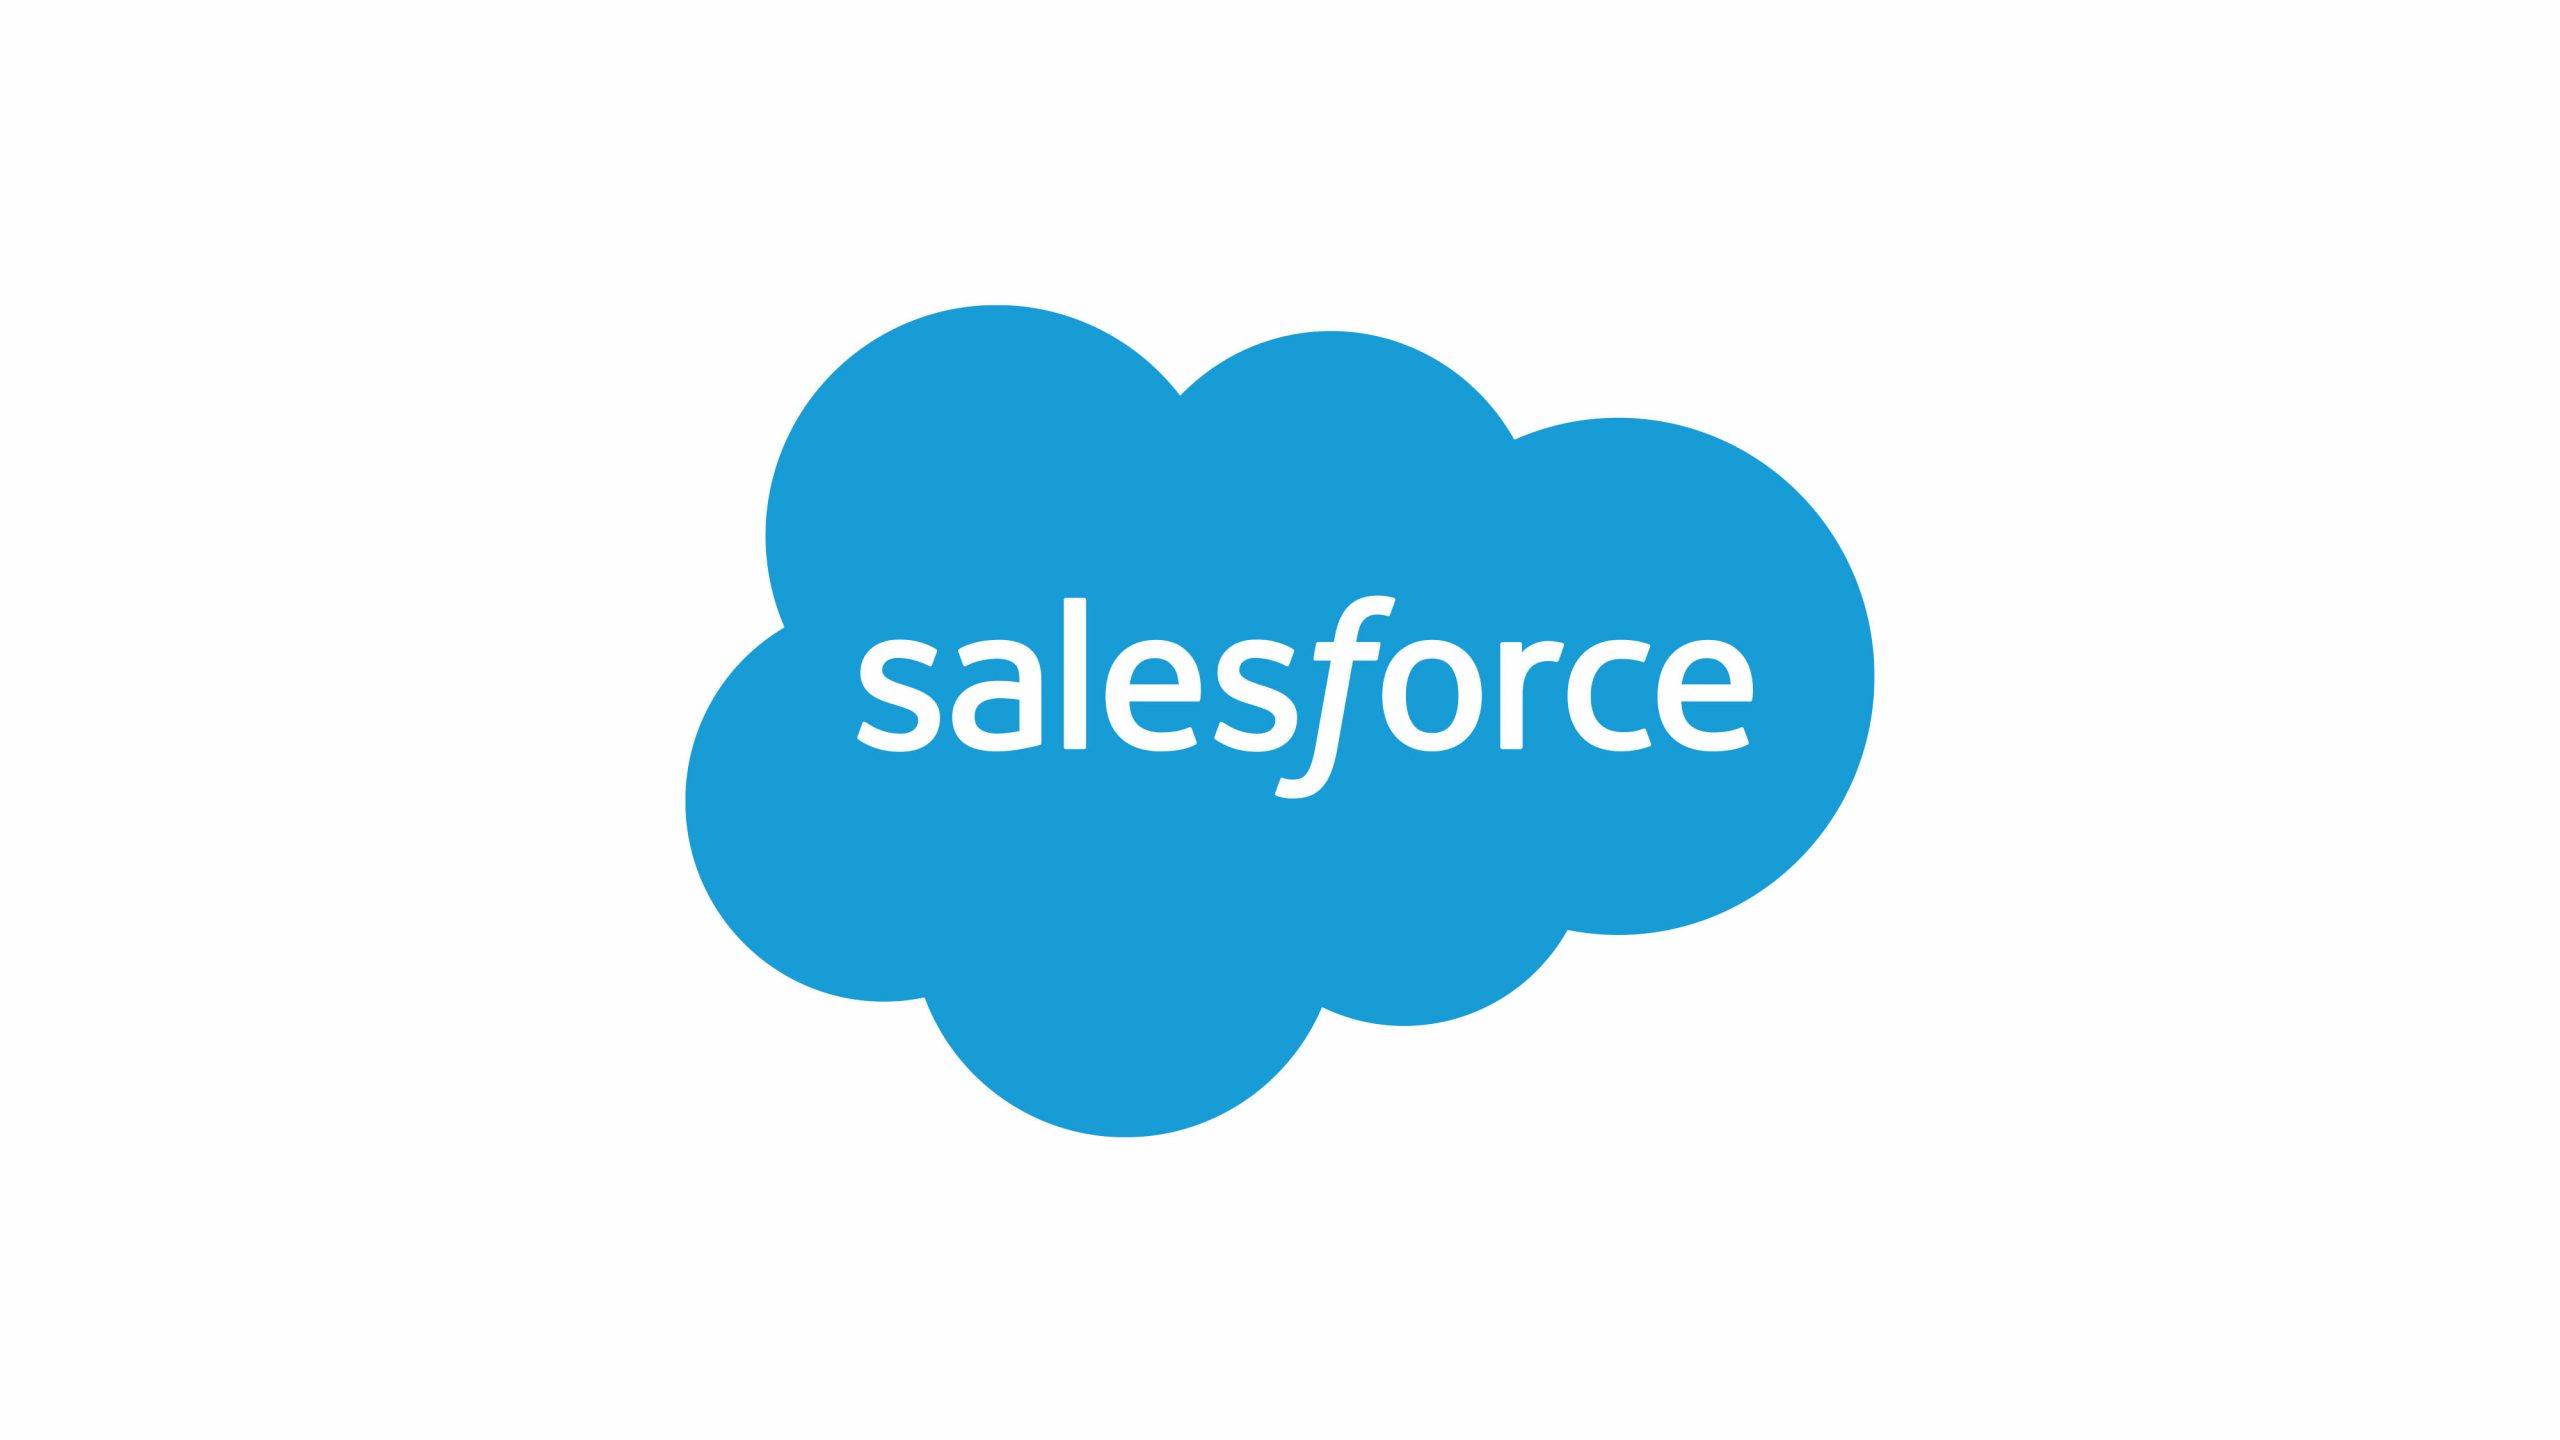 Salesforce Launches Health Cloud 2.0, a Connected Platform to Help Deliver Health and Safety from Anywhere